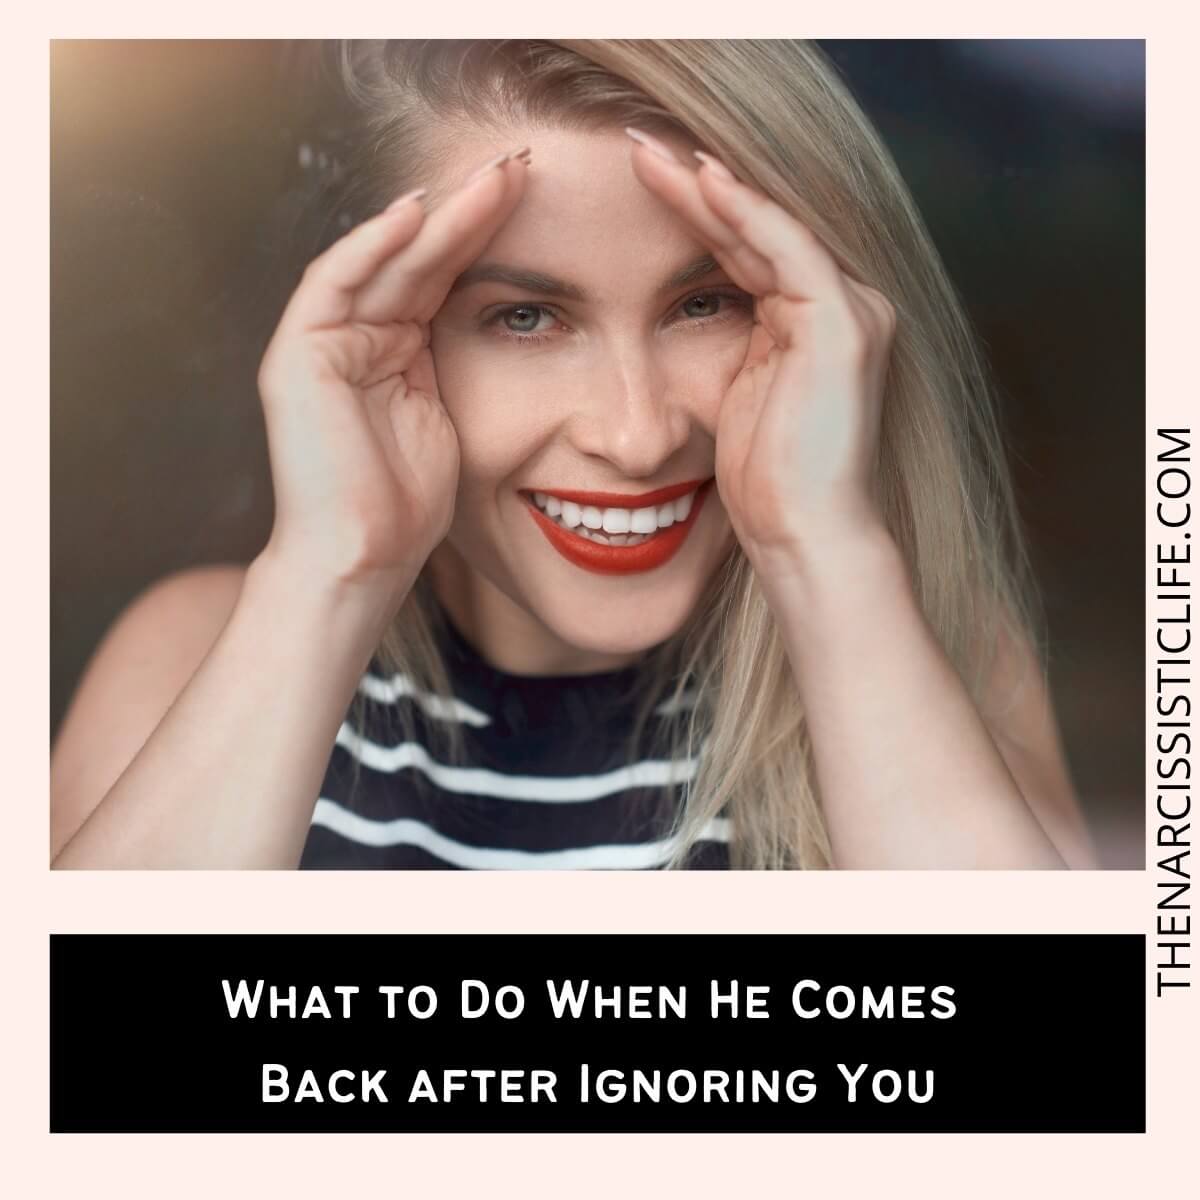 What to do when he comes back after ignoring you